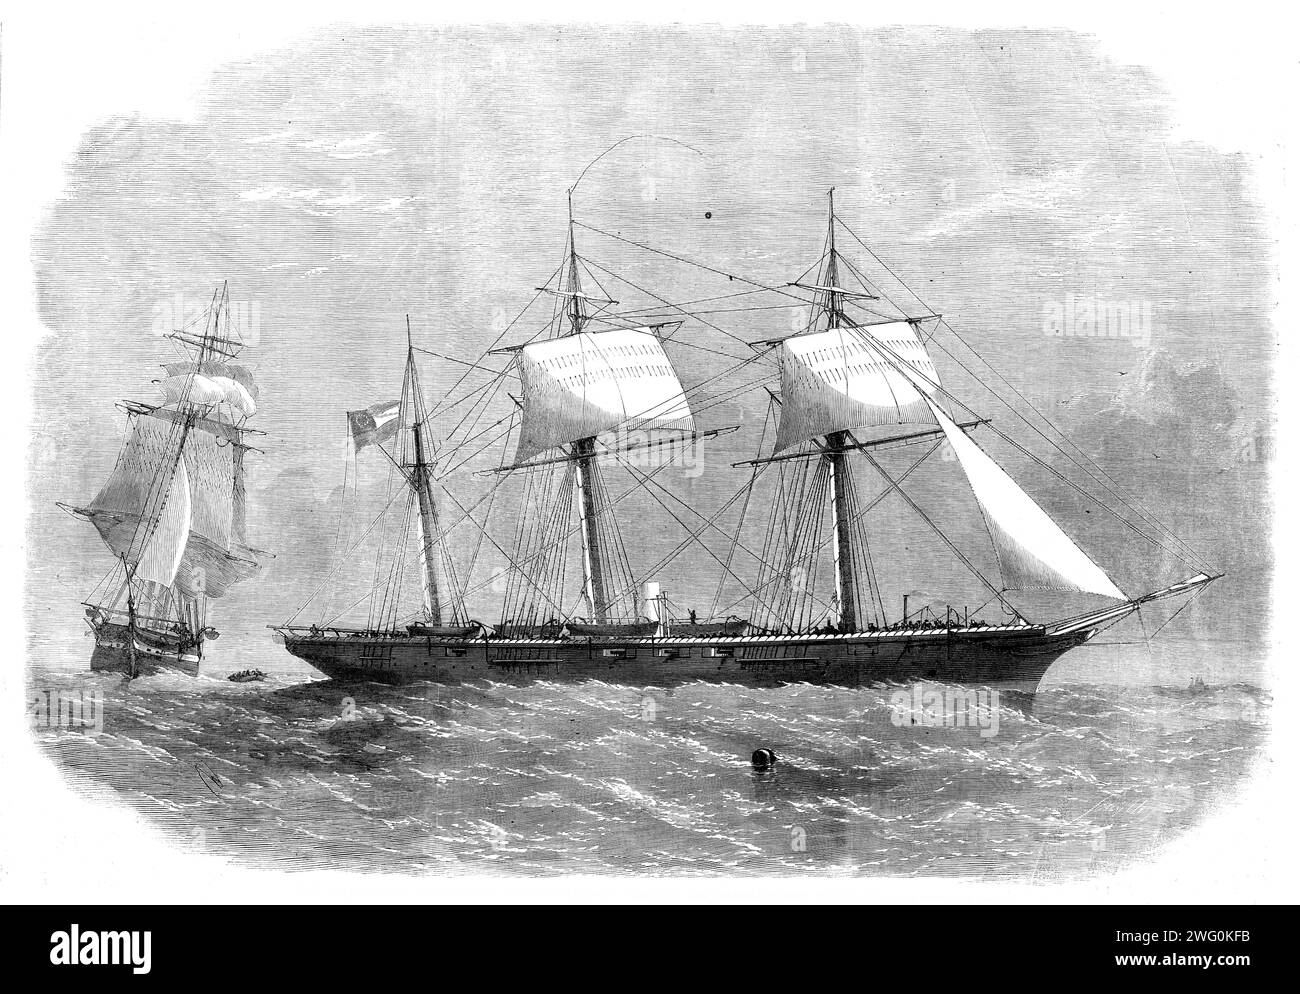 The Confederate sloop-of-war &quot;290&quot; or Alabama, leaving the merchant-ship Tonowanda, 1862. Engraving from a sketch by Mr. W. Woods. 'The Alabama, formerly the 290...has a 109-pounder rifled pivot-gun forward of the bridge, and a 63-pounder on the main-deck...the Attorney and Solicitor General, have given opinions that her sailing so armed and on such an errand as hers was a breach of the Queen's proclamation of neutrality...Our Engraving...represents the Alabama leaving the Tonowanda after having put on board that vessel the captains and crews of several Federal merchantmen which she Stock Photo